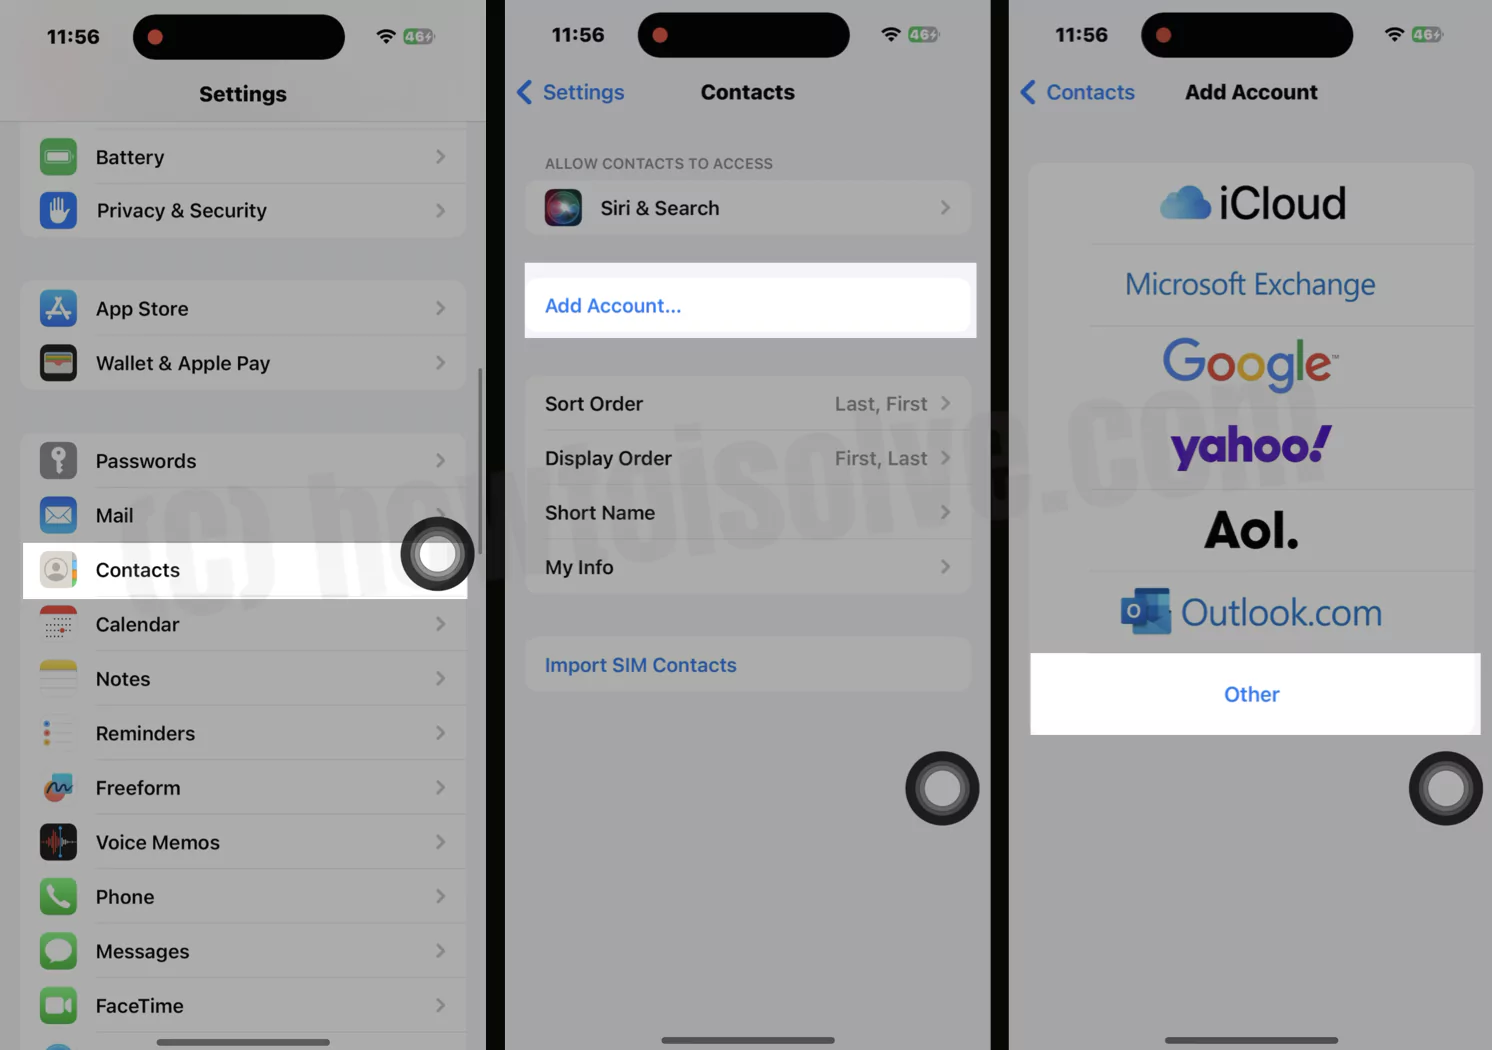 Add Account in Contact iPhone app